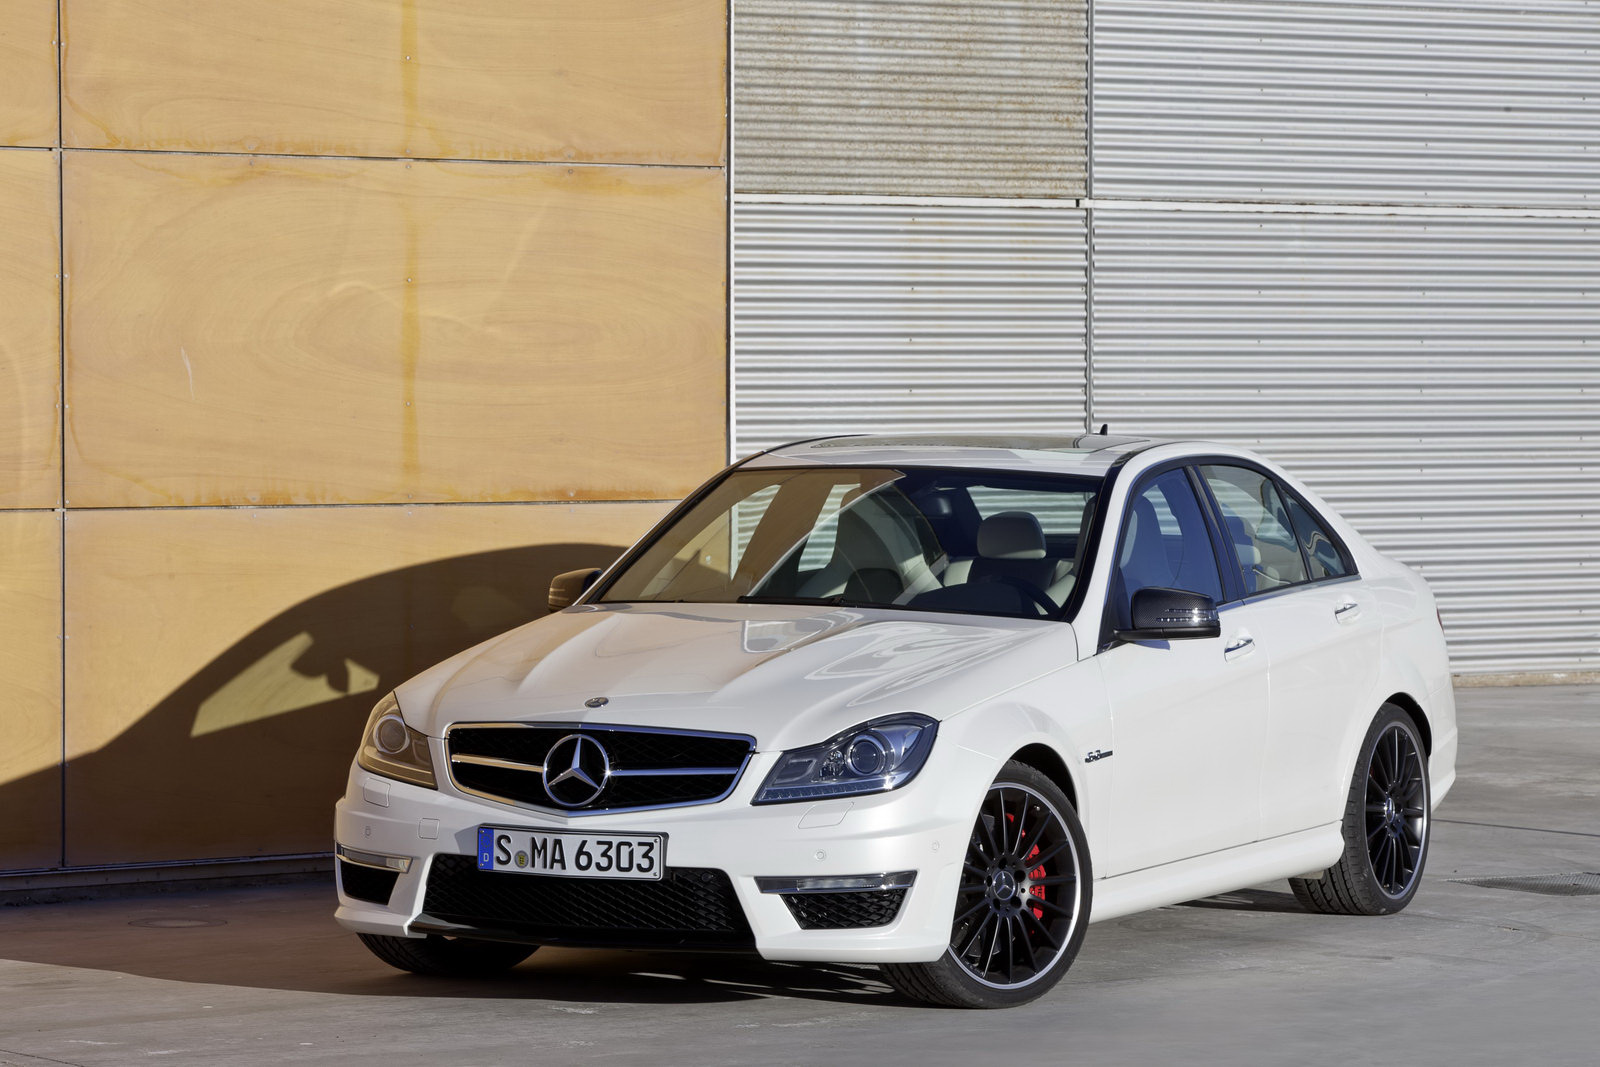 Fichiers Tuning Haute Qualité Mercedes-Benz C 63 AMG PPP 487hp